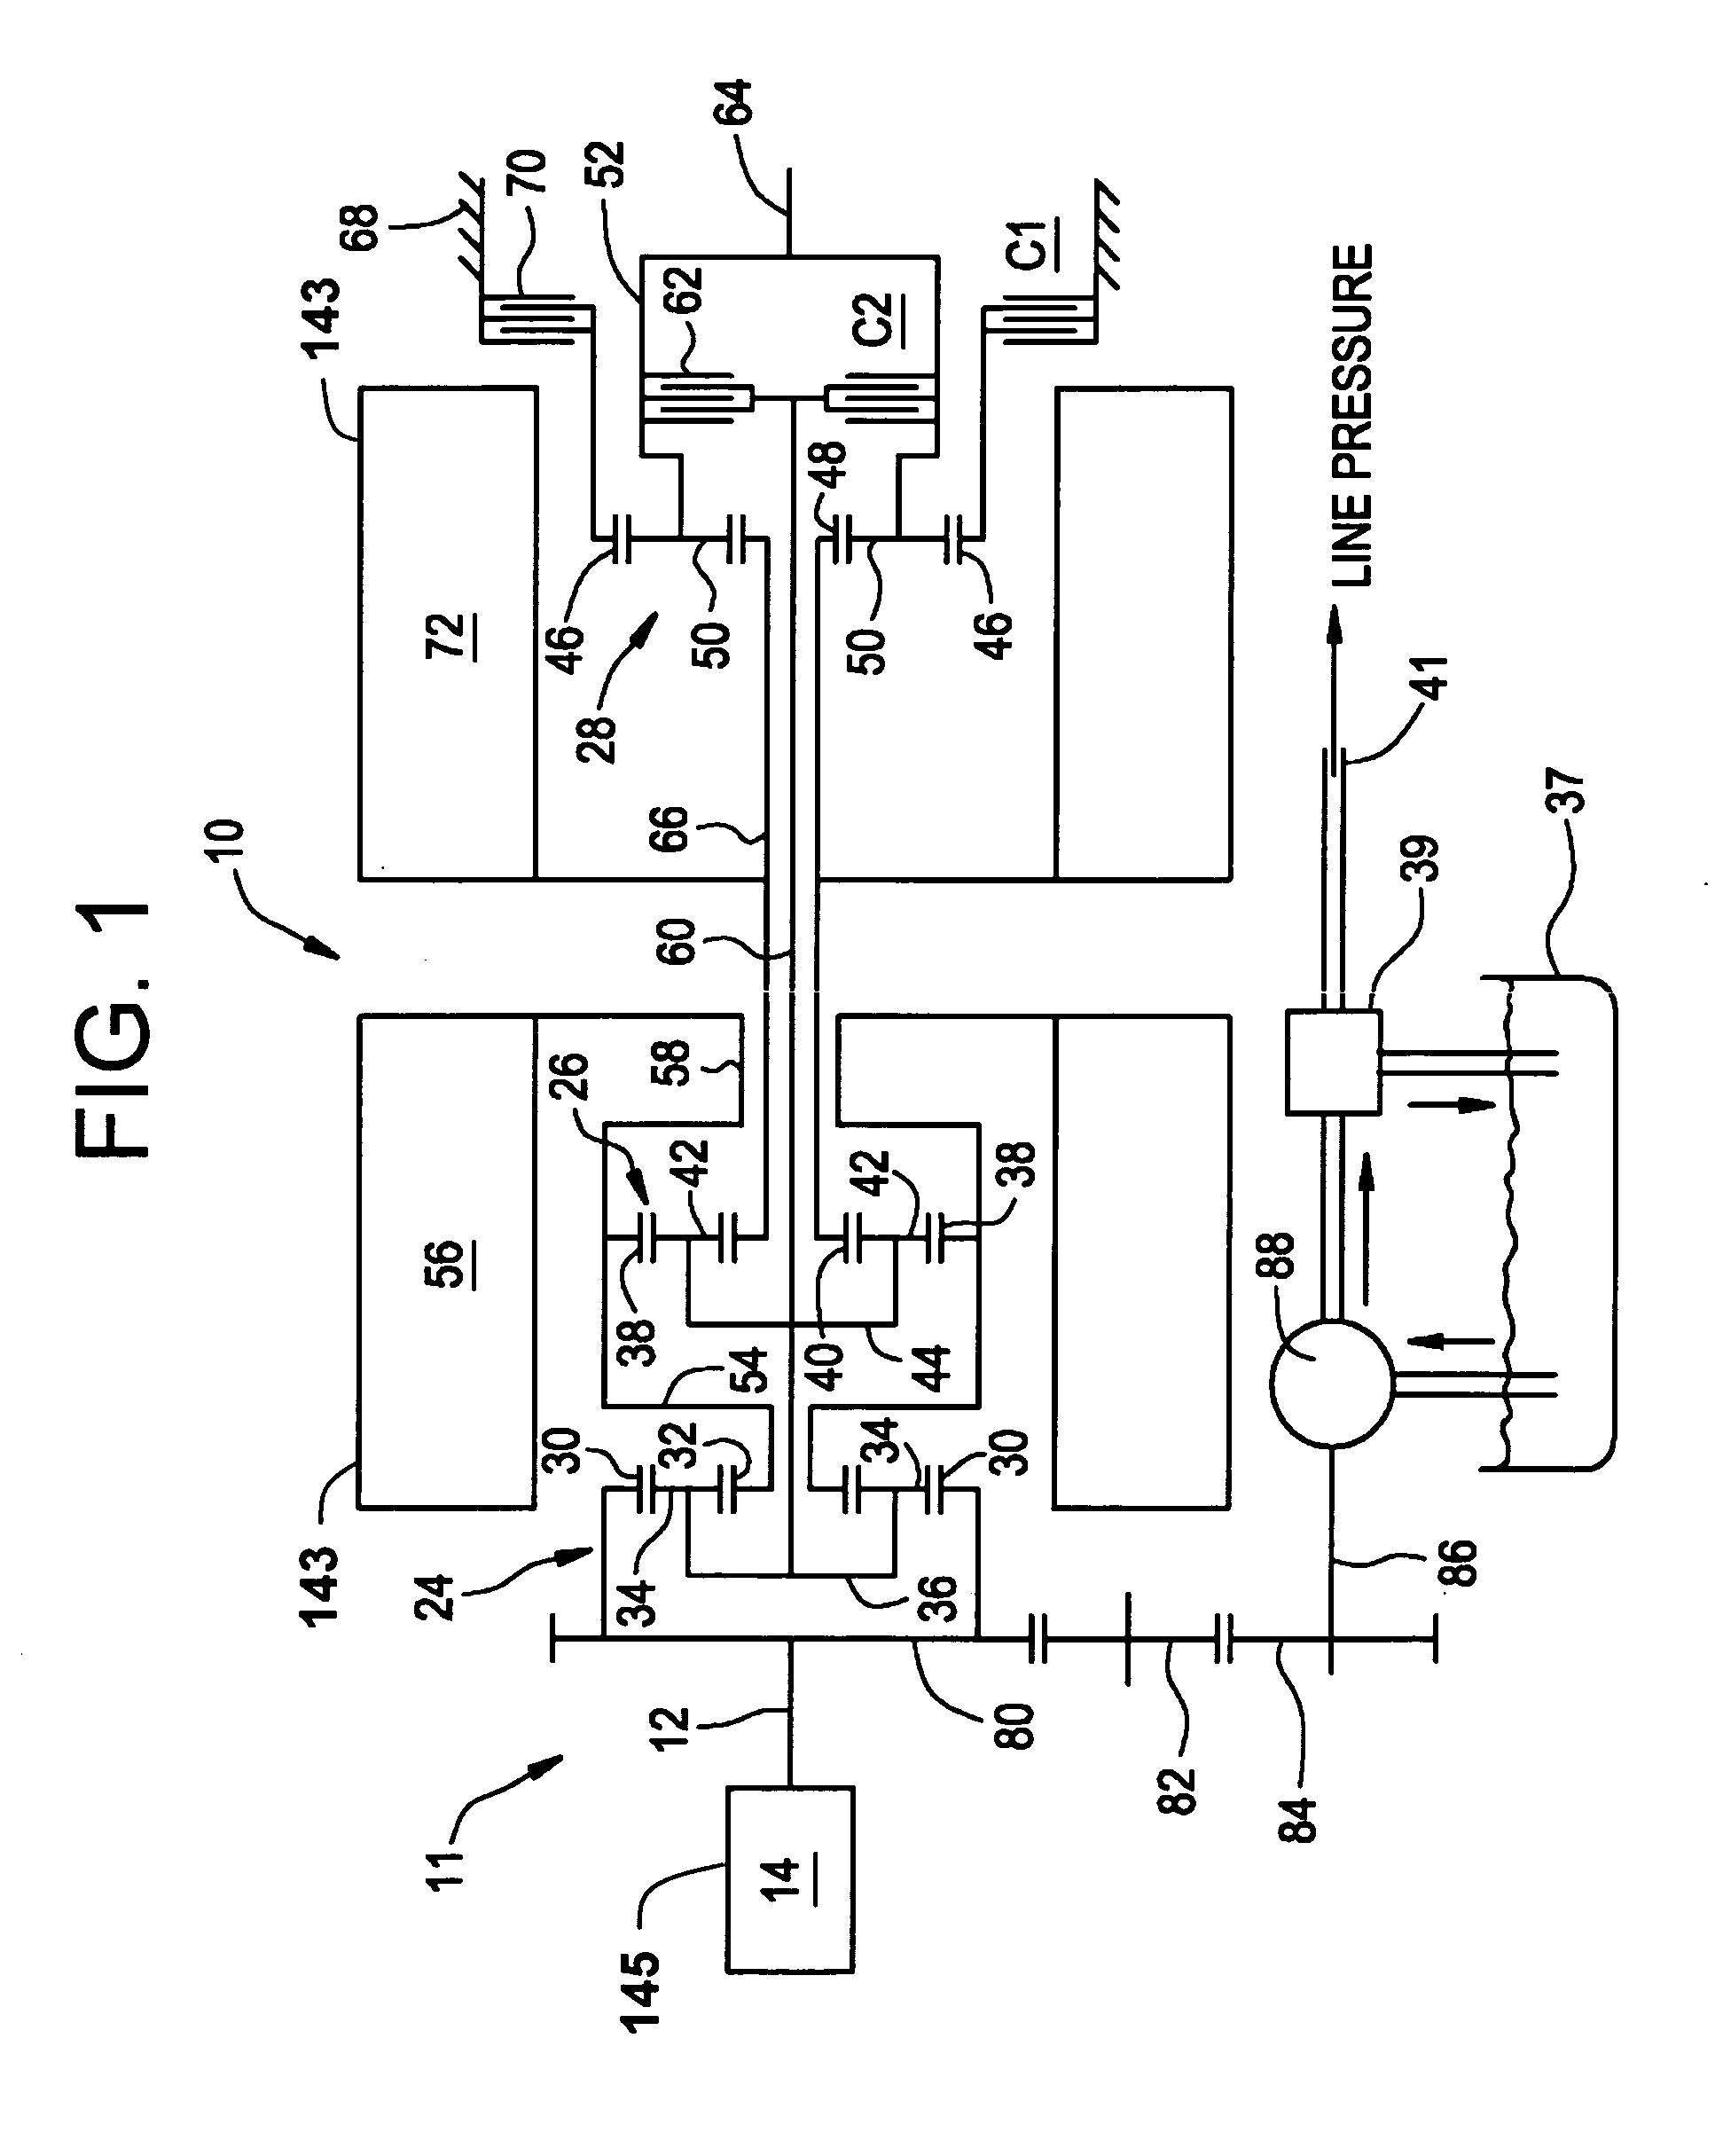 Method for active engine stop of a hybrid electric vehicle